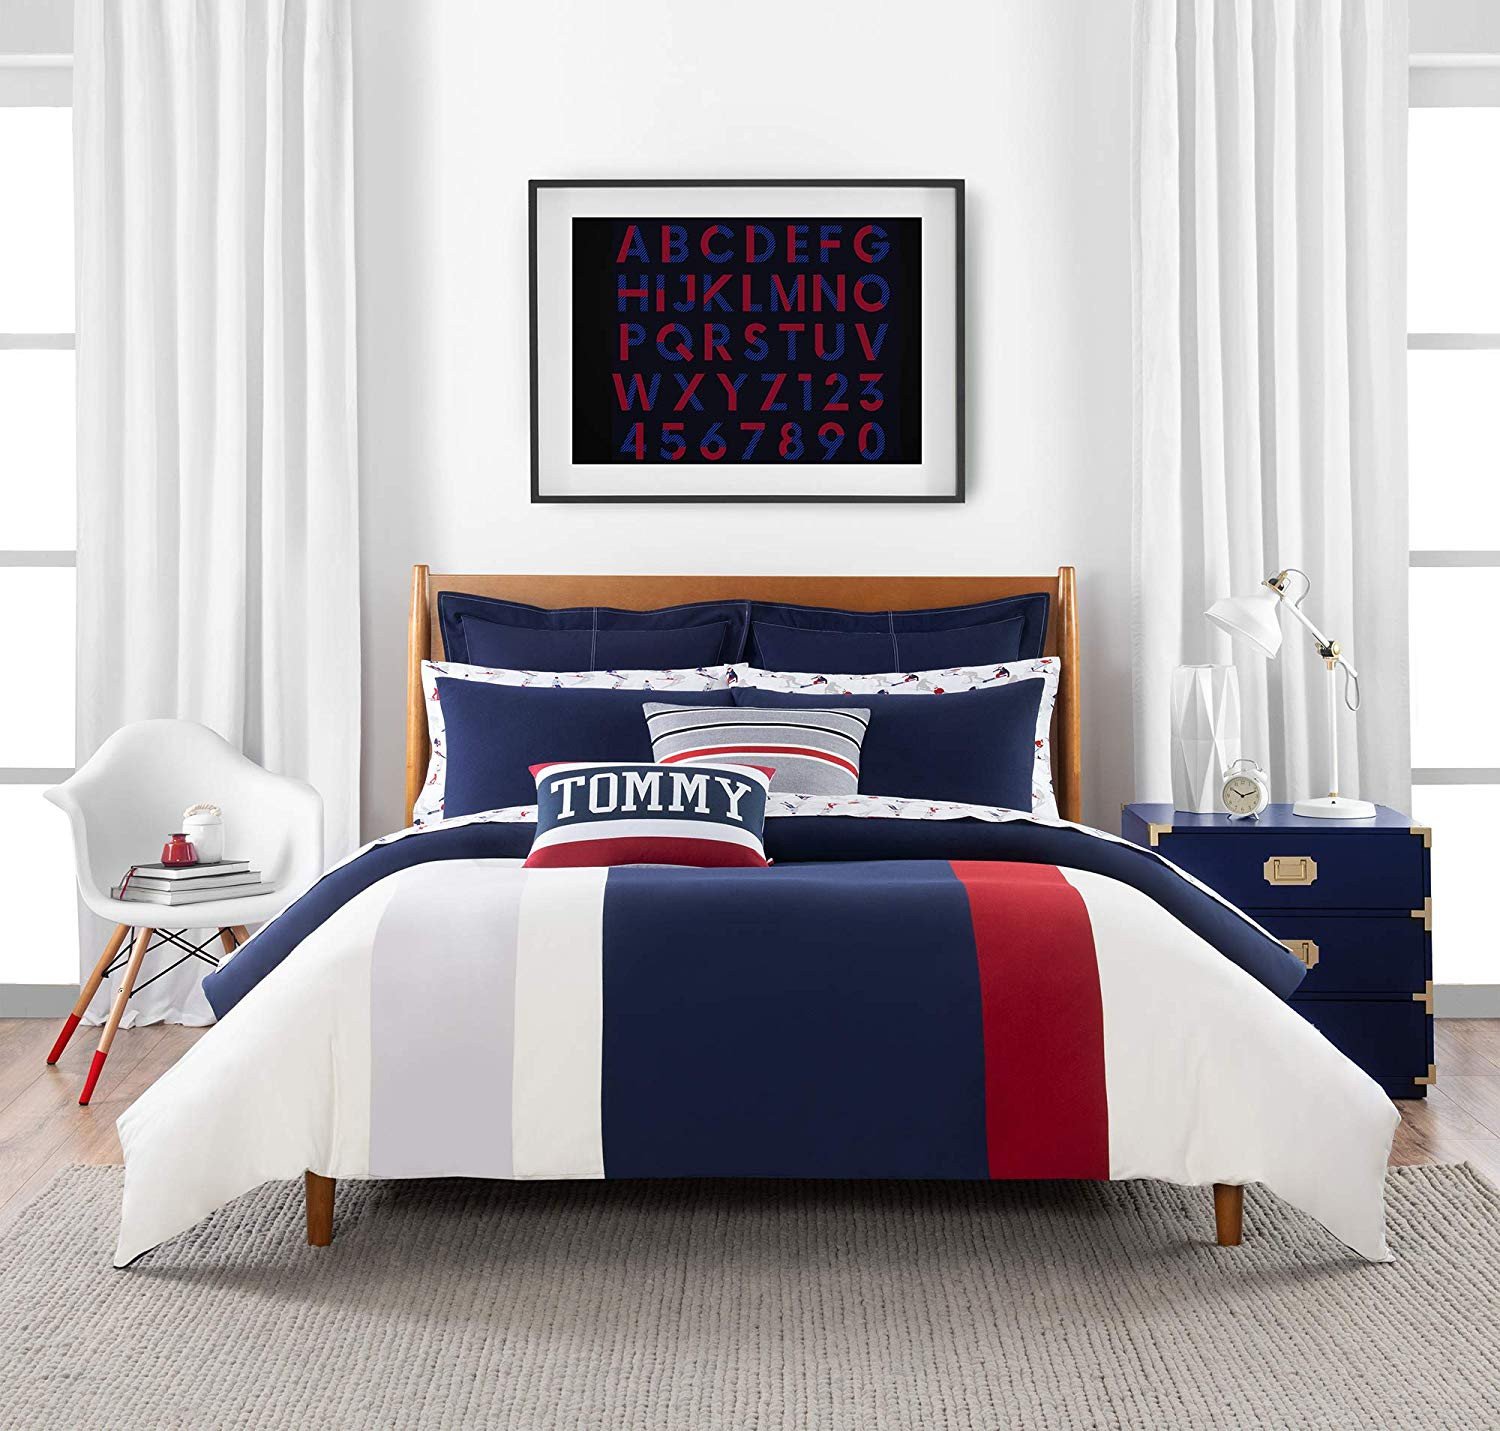 Discount Bedroom Furniture Set Awesome Amazon tommy Hilfiger Clash Of 85 Stripe Bedding